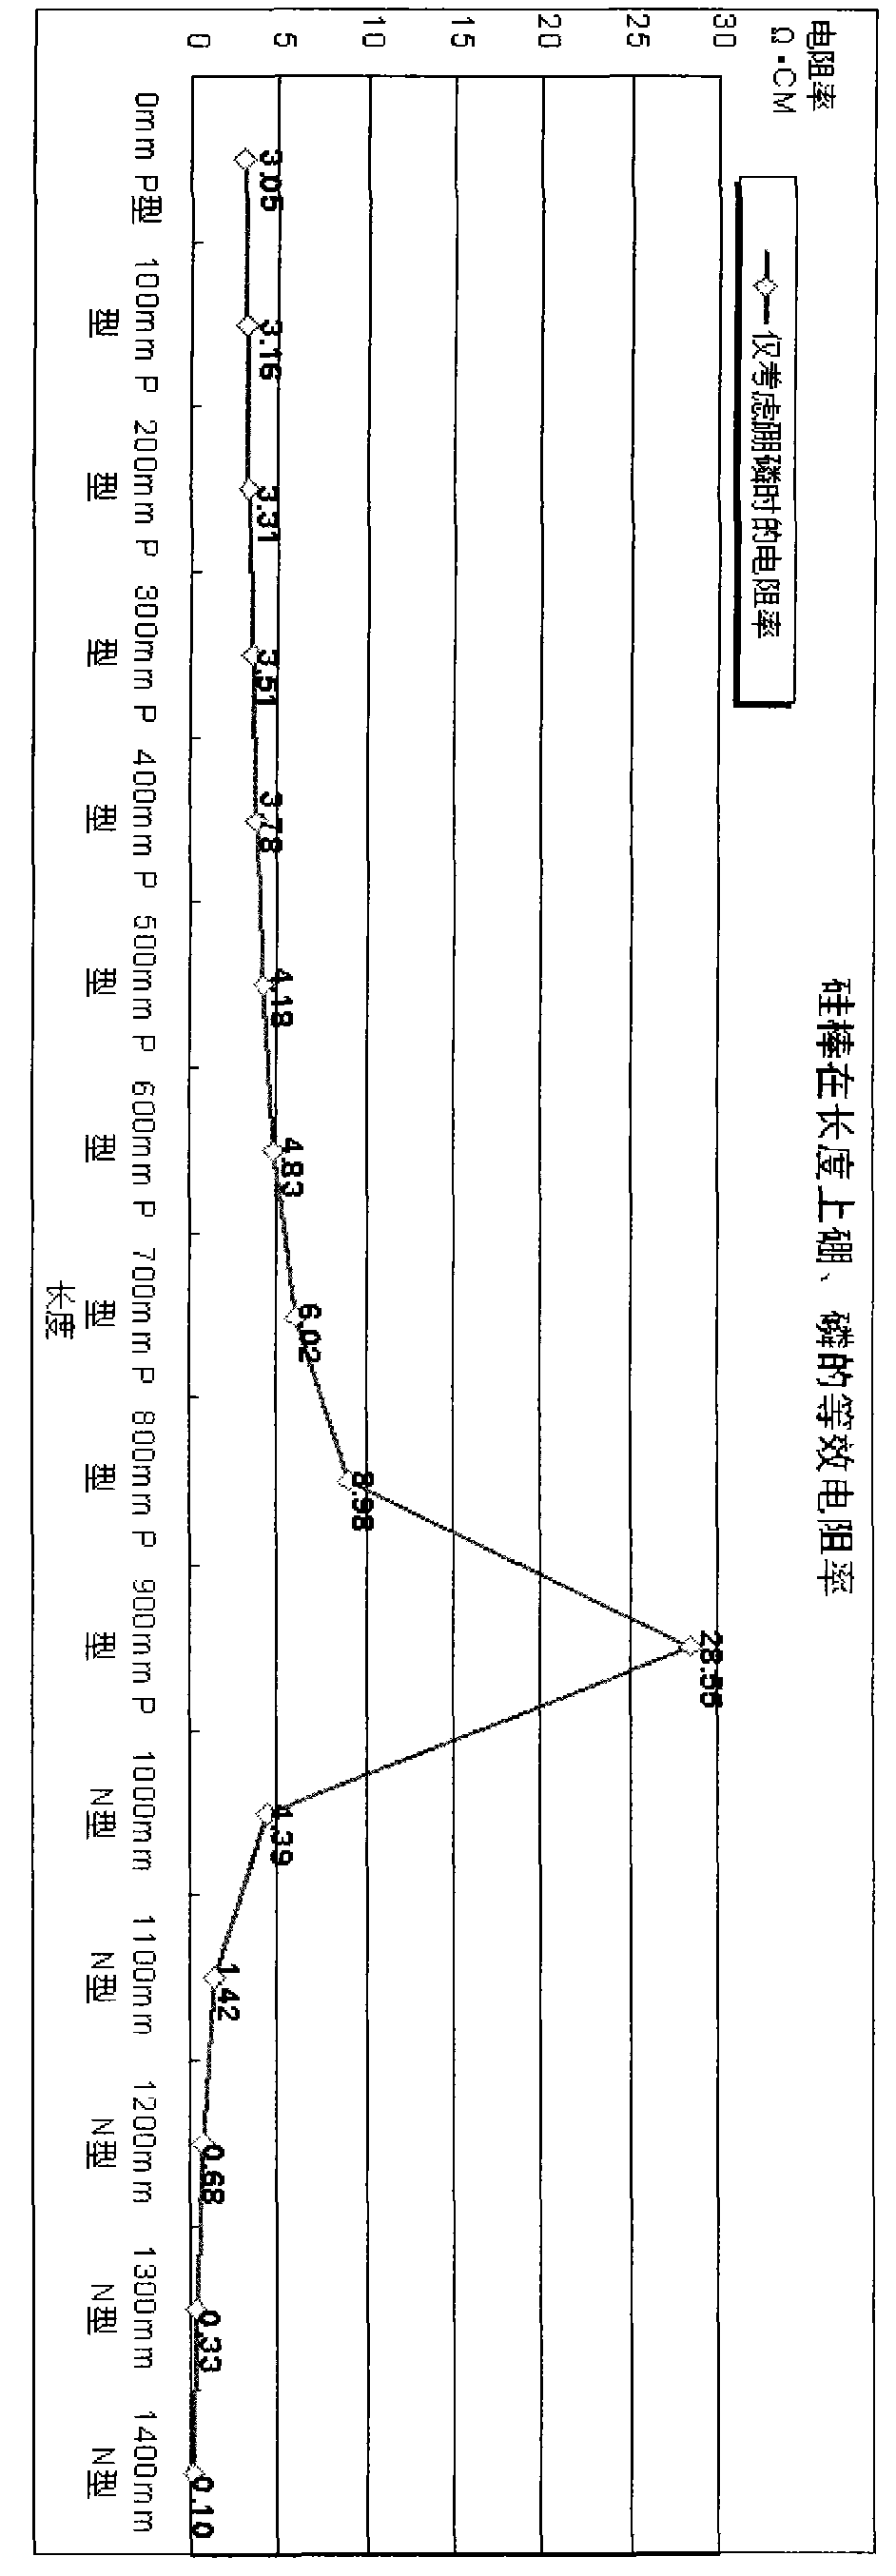 Analysis method of boron and phosphor in Ga-doped CZ silicon rod and ingredients